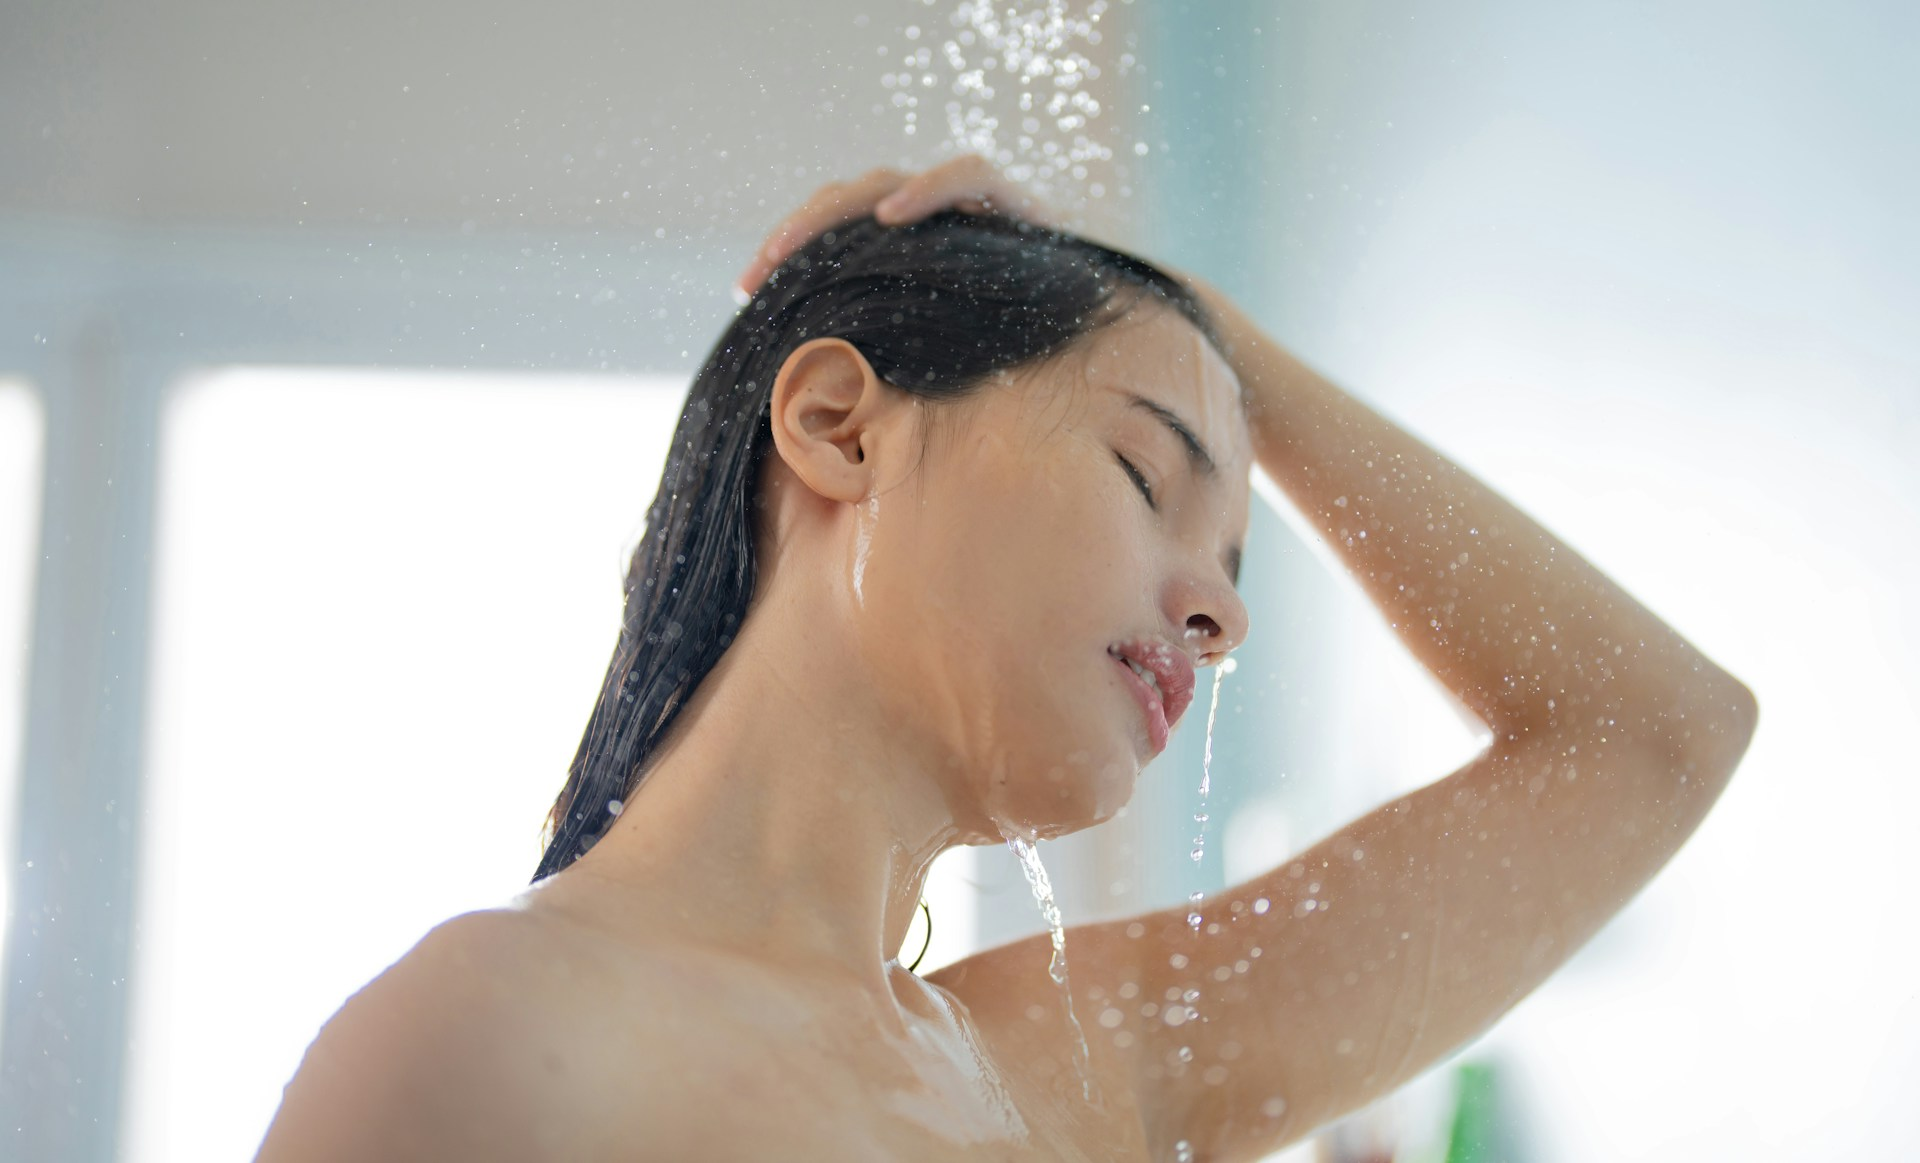 https://unsplash.com/photos/asian-woman-she-takes-a-shower-and-washes-her-hair-in-the-bathroom-QGitIV8sEow